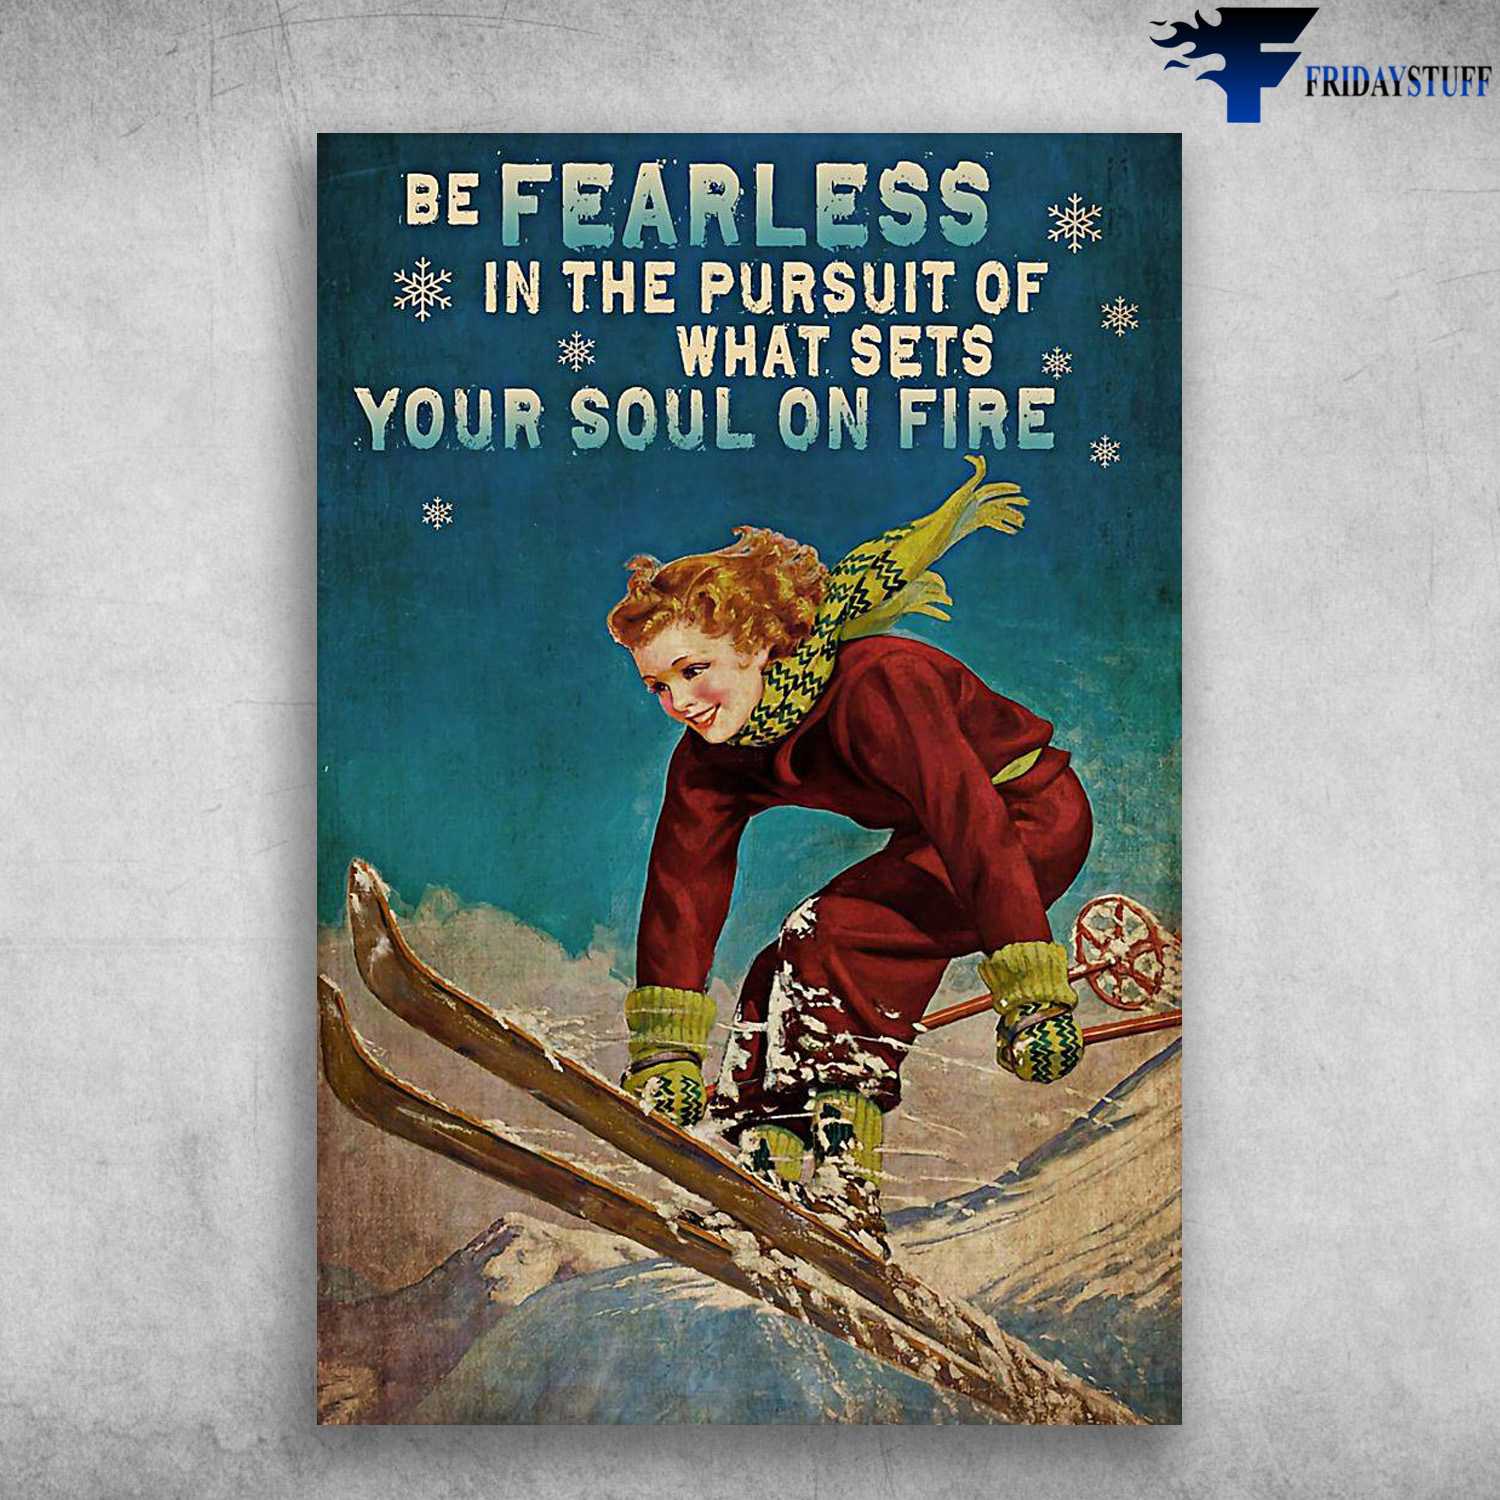 Skiing Lady, Skiing Poster, Be Fearless In The Pursuit Of What Sets, Your Soul On Fire